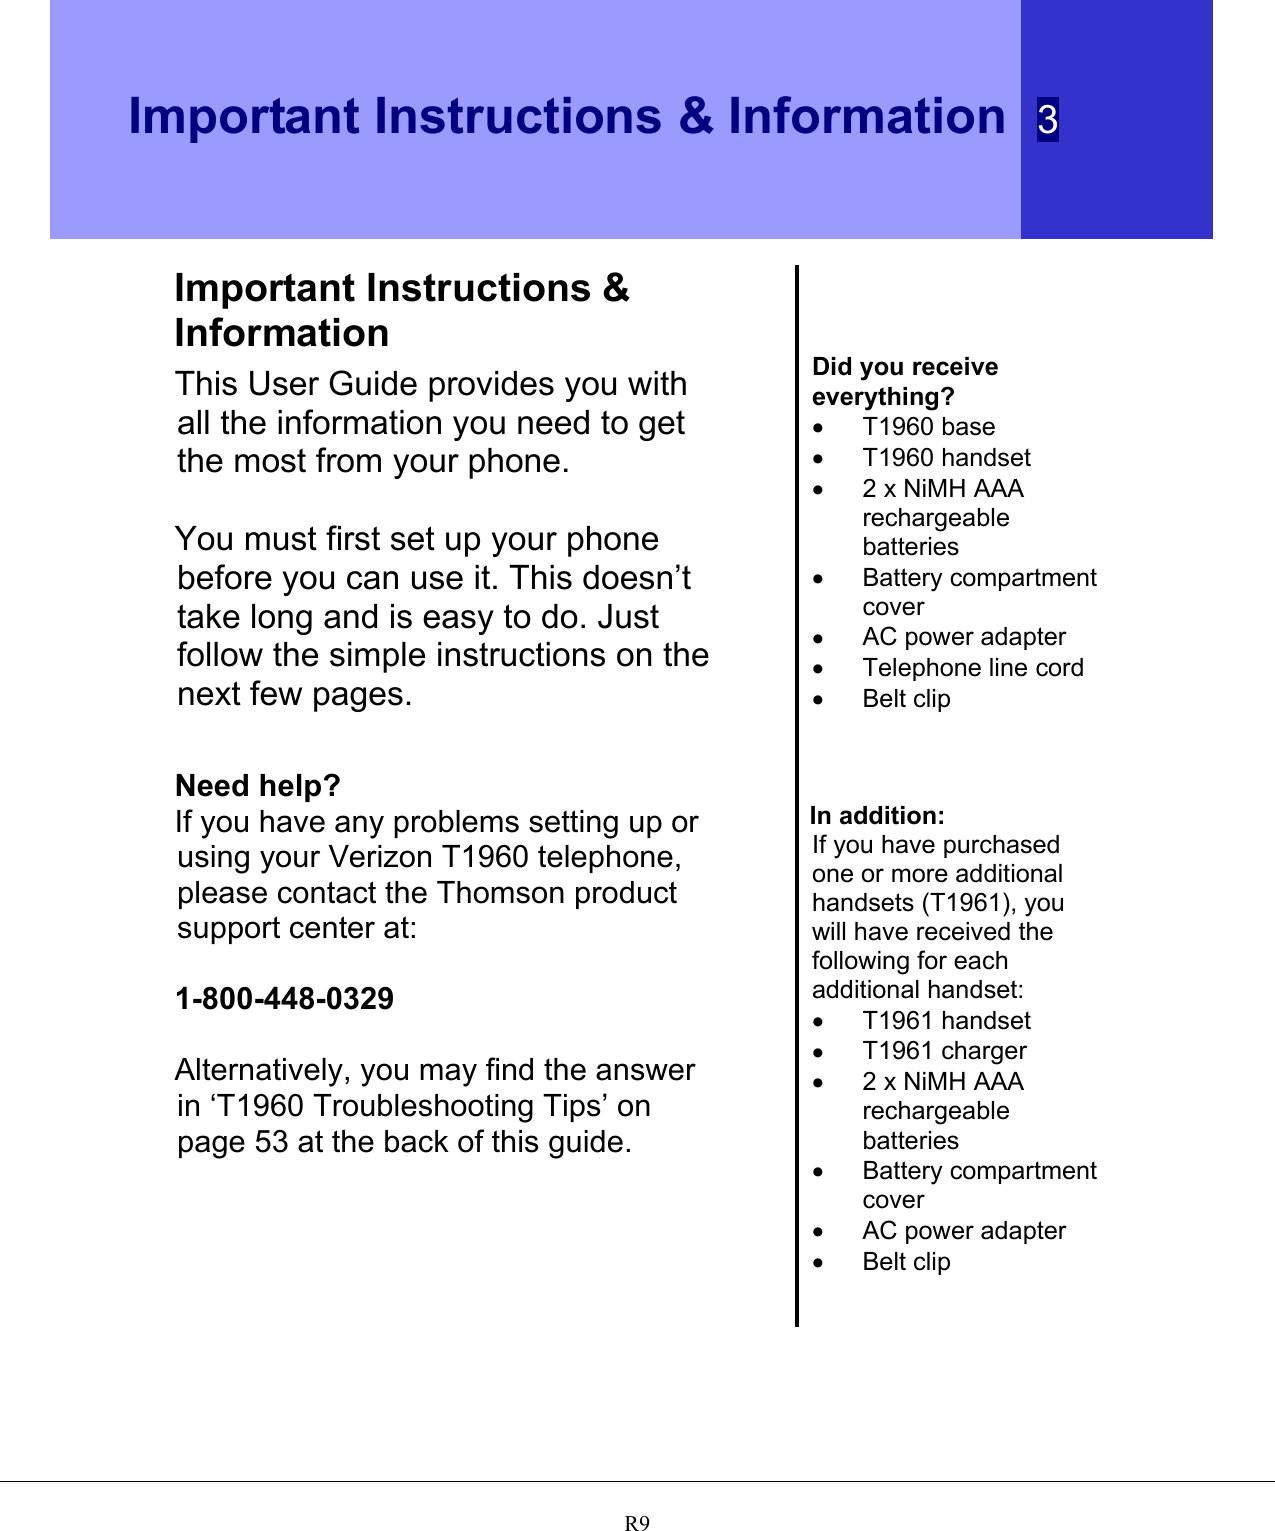  Important Instructions &amp; Information  3   R9Important Instructions &amp; Information This User Guide provides you with all the information you need to get the most from your phone.  You must first set up your phone before you can use it. This doesn’t take long and is easy to do. Just follow the simple instructions on the next few pages.   Need help? If you have any problems setting up or using your Verizon T1960 telephone, please contact the Thomson product support center at:  1-800-448-0329  Alternatively, you may find the answer in ‘T1960 Troubleshooting Tips’ on page 53 at the back of this guide.       Did you receive everything? •  T1960 base •  T1960 handset •  2 x NiMH AAA rechargeable batteries •  Battery compartment cover •  AC power adapter •  Telephone line cord •  Belt clip    In addition: If you have purchased one or more additional handsets (T1961), you will have received the following for each additional handset: •  T1961 handset •  T1961 charger •  2 x NiMH AAA rechargeable batteries •  Battery compartment cover •  AC power adapter •  Belt clip  